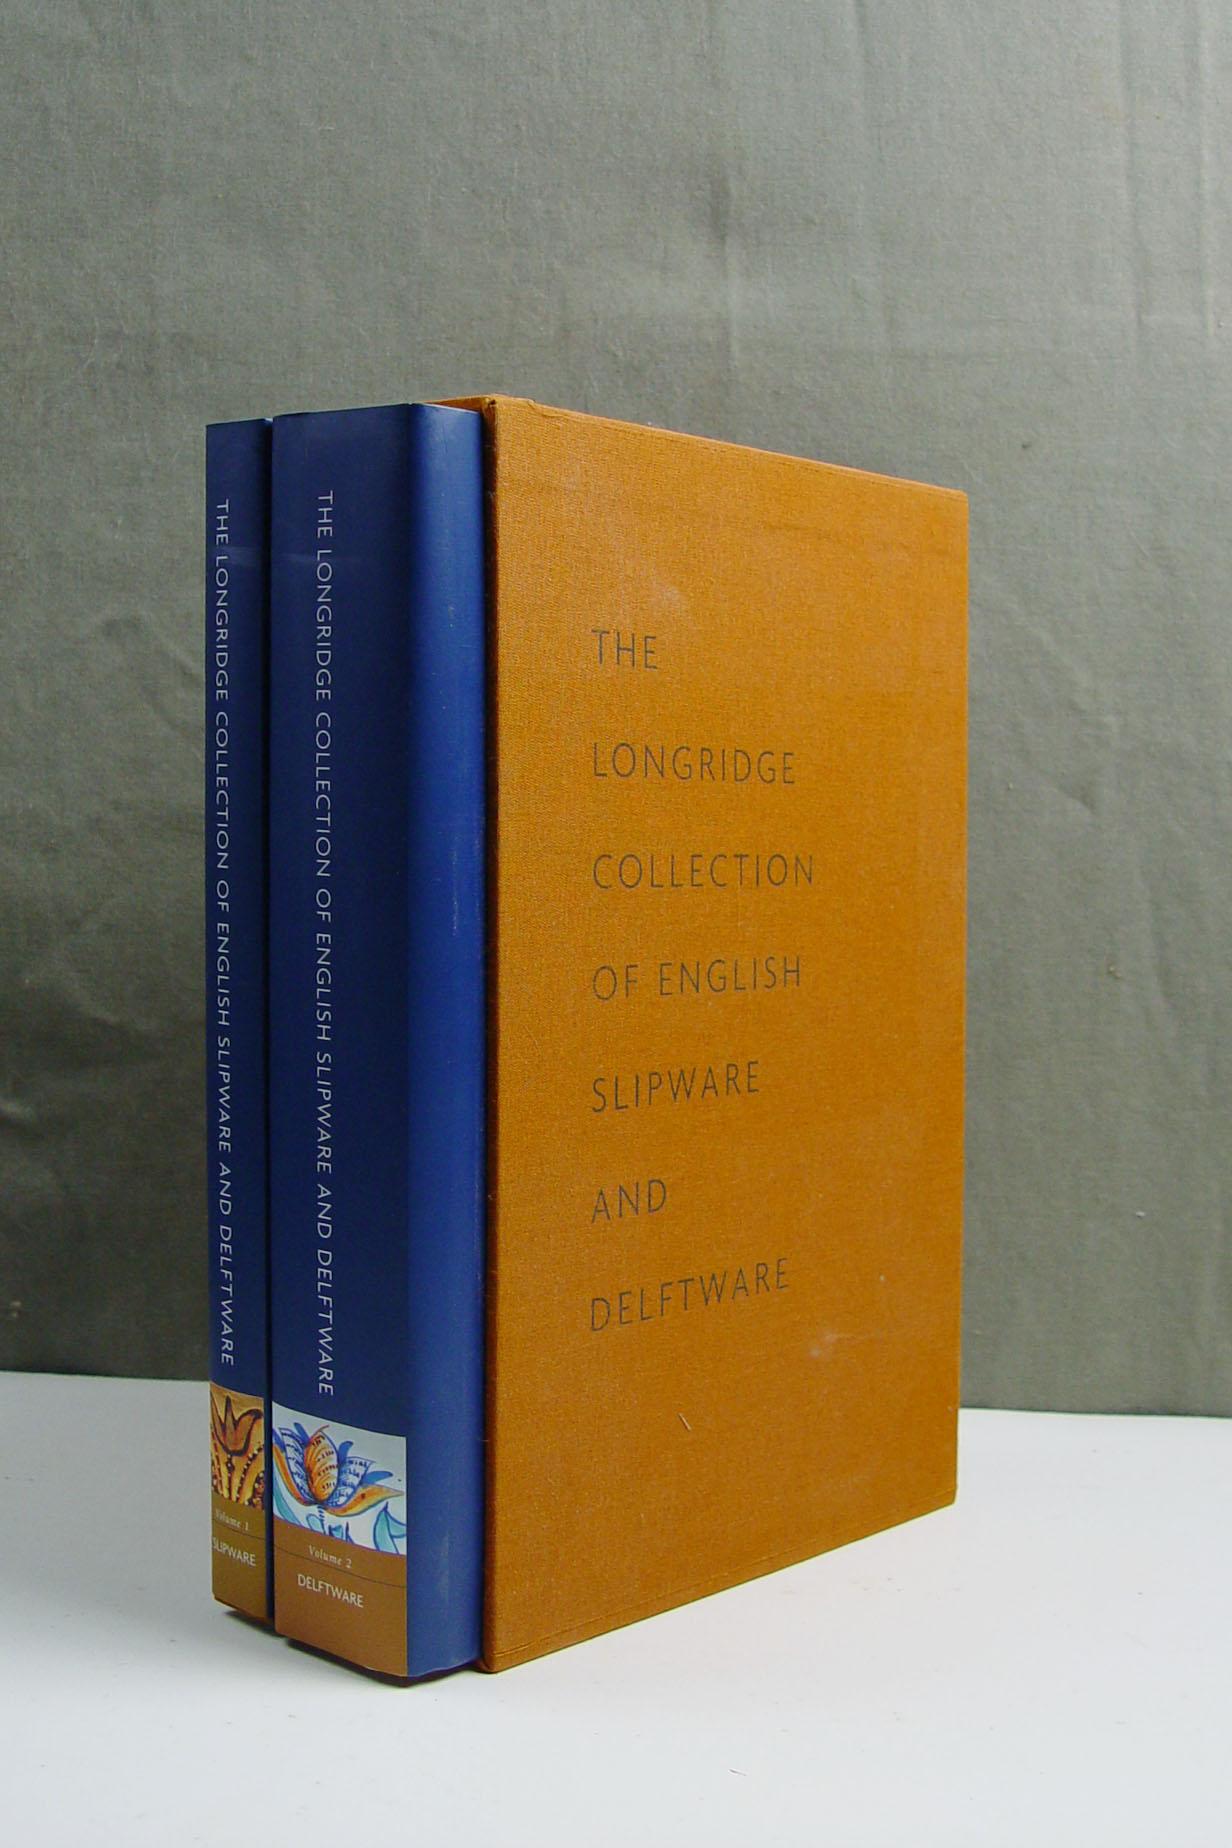 The Longridge Collection of English Slipware and Delftware by Leslie B. Grigsby, 2 volumes. Published by Jonathan Horn, London, 2000. Printed and bound in Italy. Ochre cloth boards, illustrated dust jackets, in ochre cloth slipcase with gilt title.